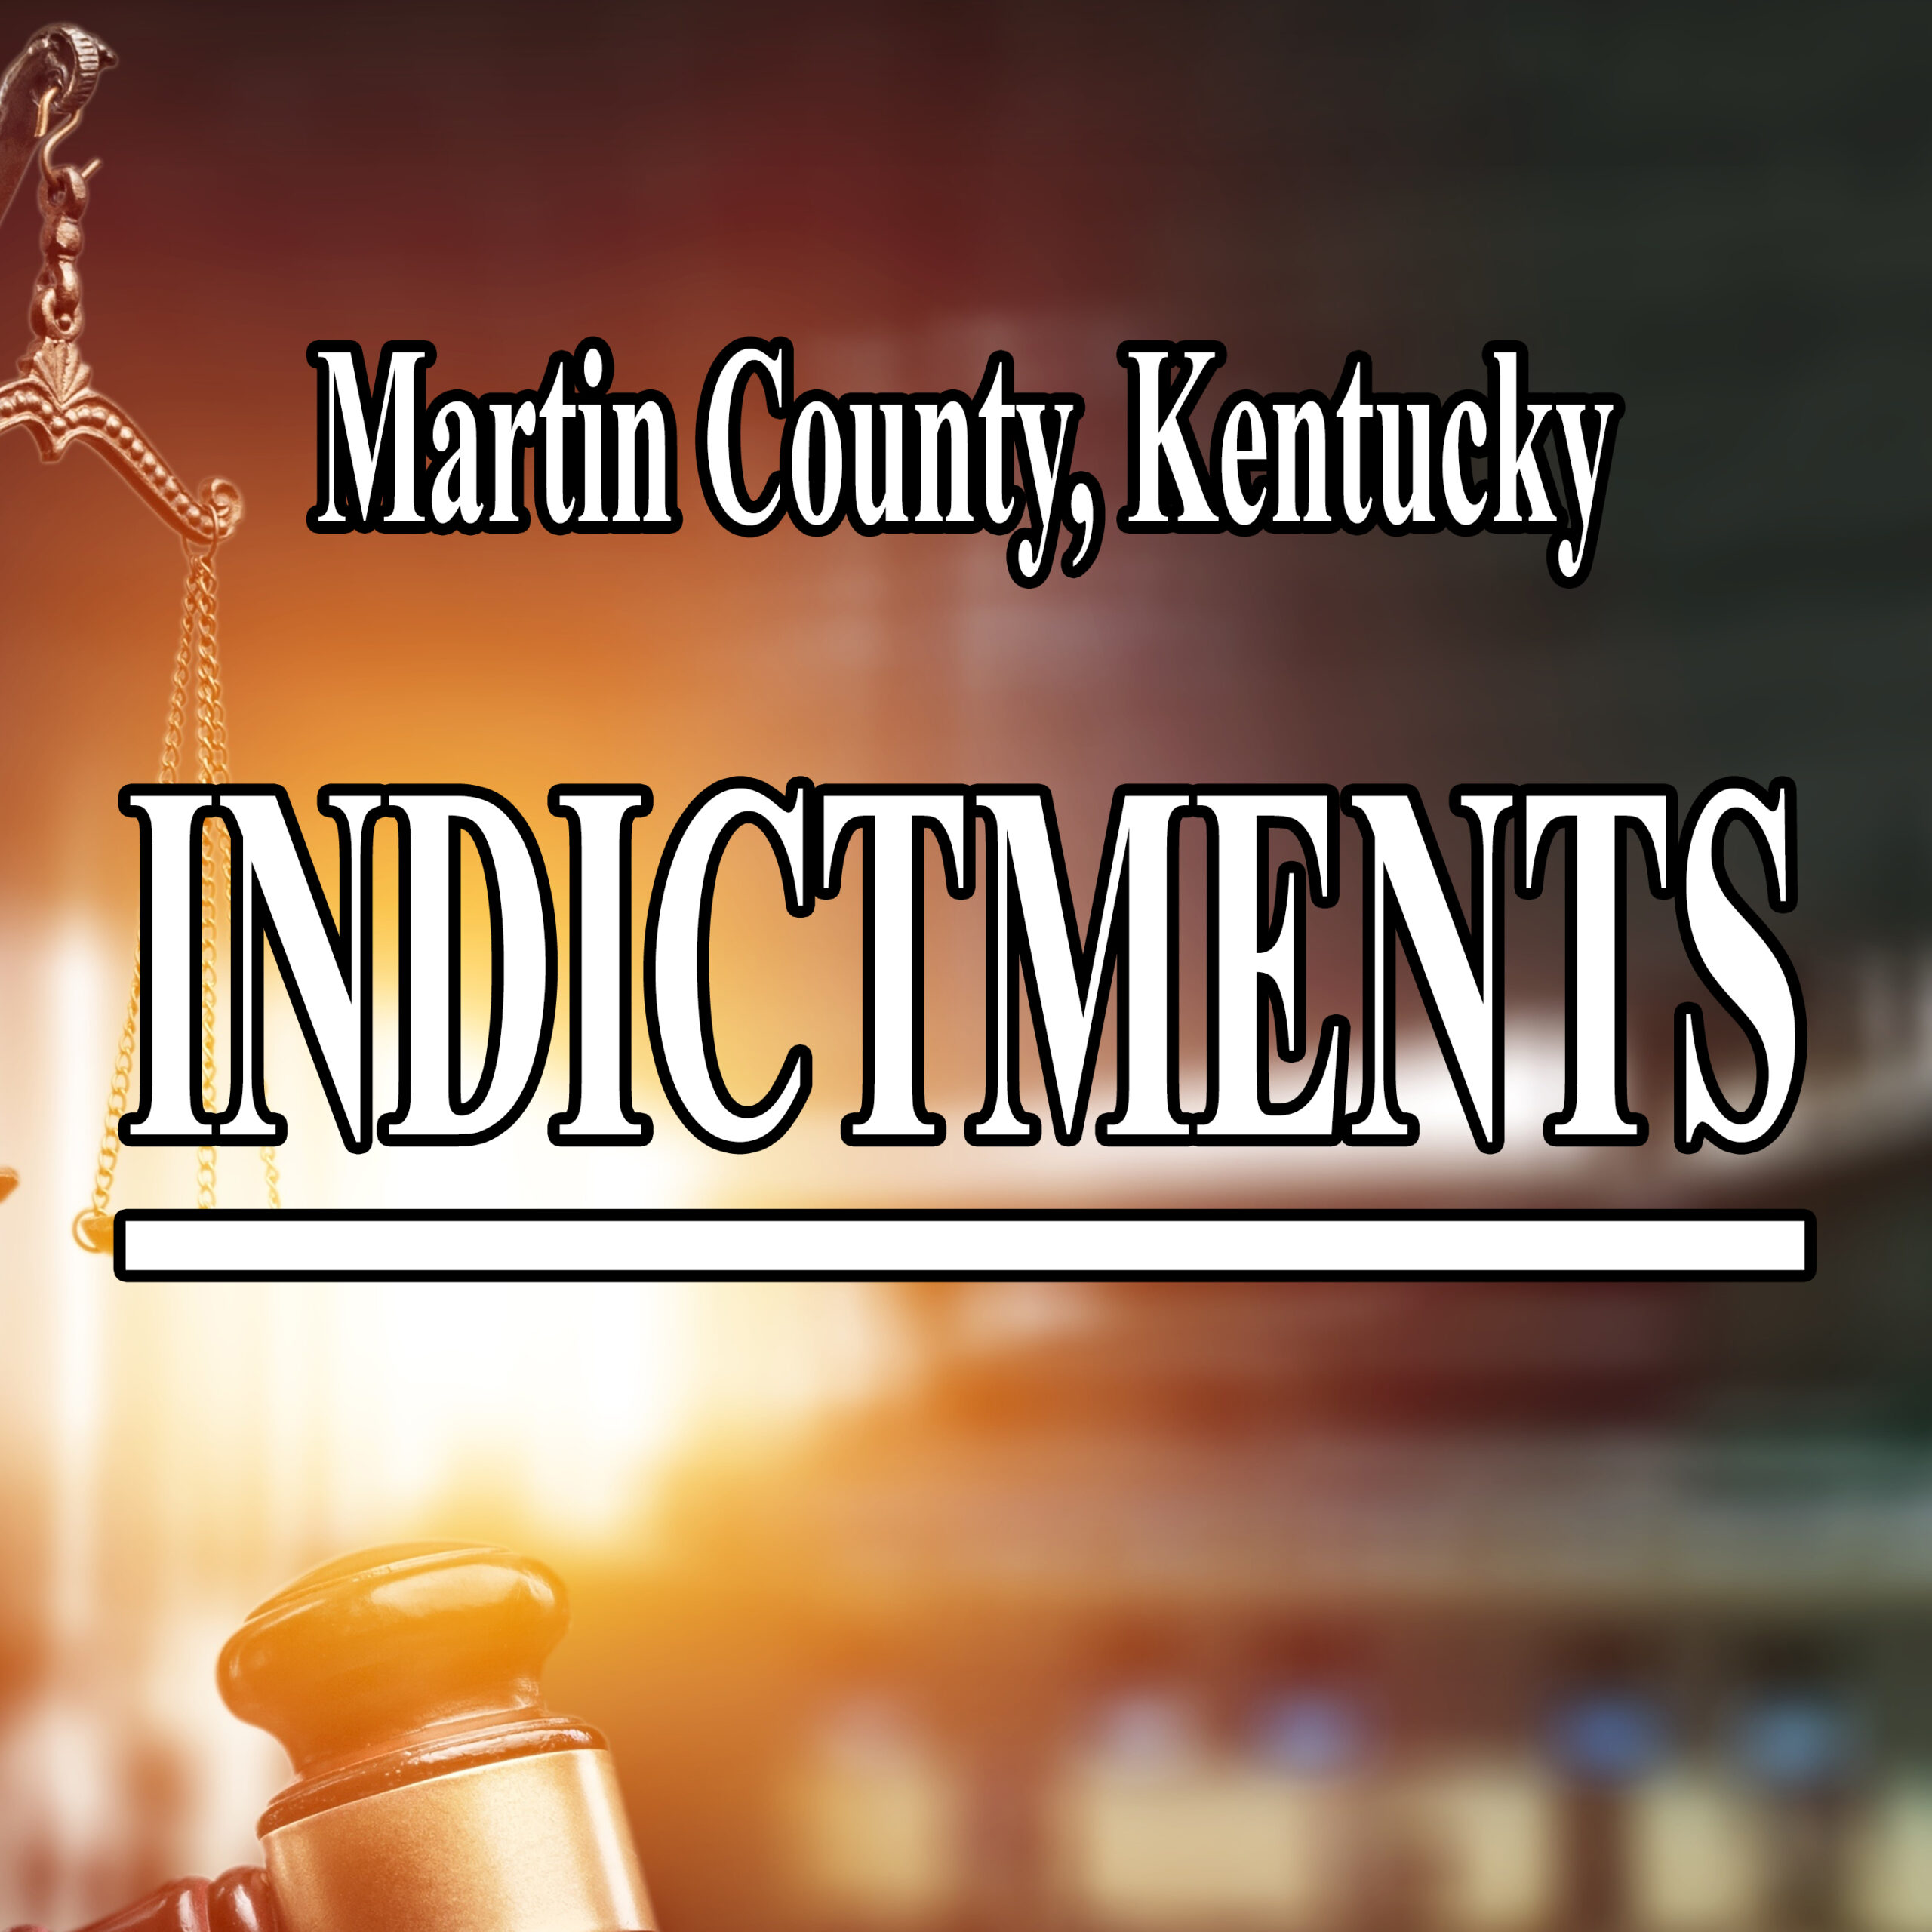 Two indicted in Martin County